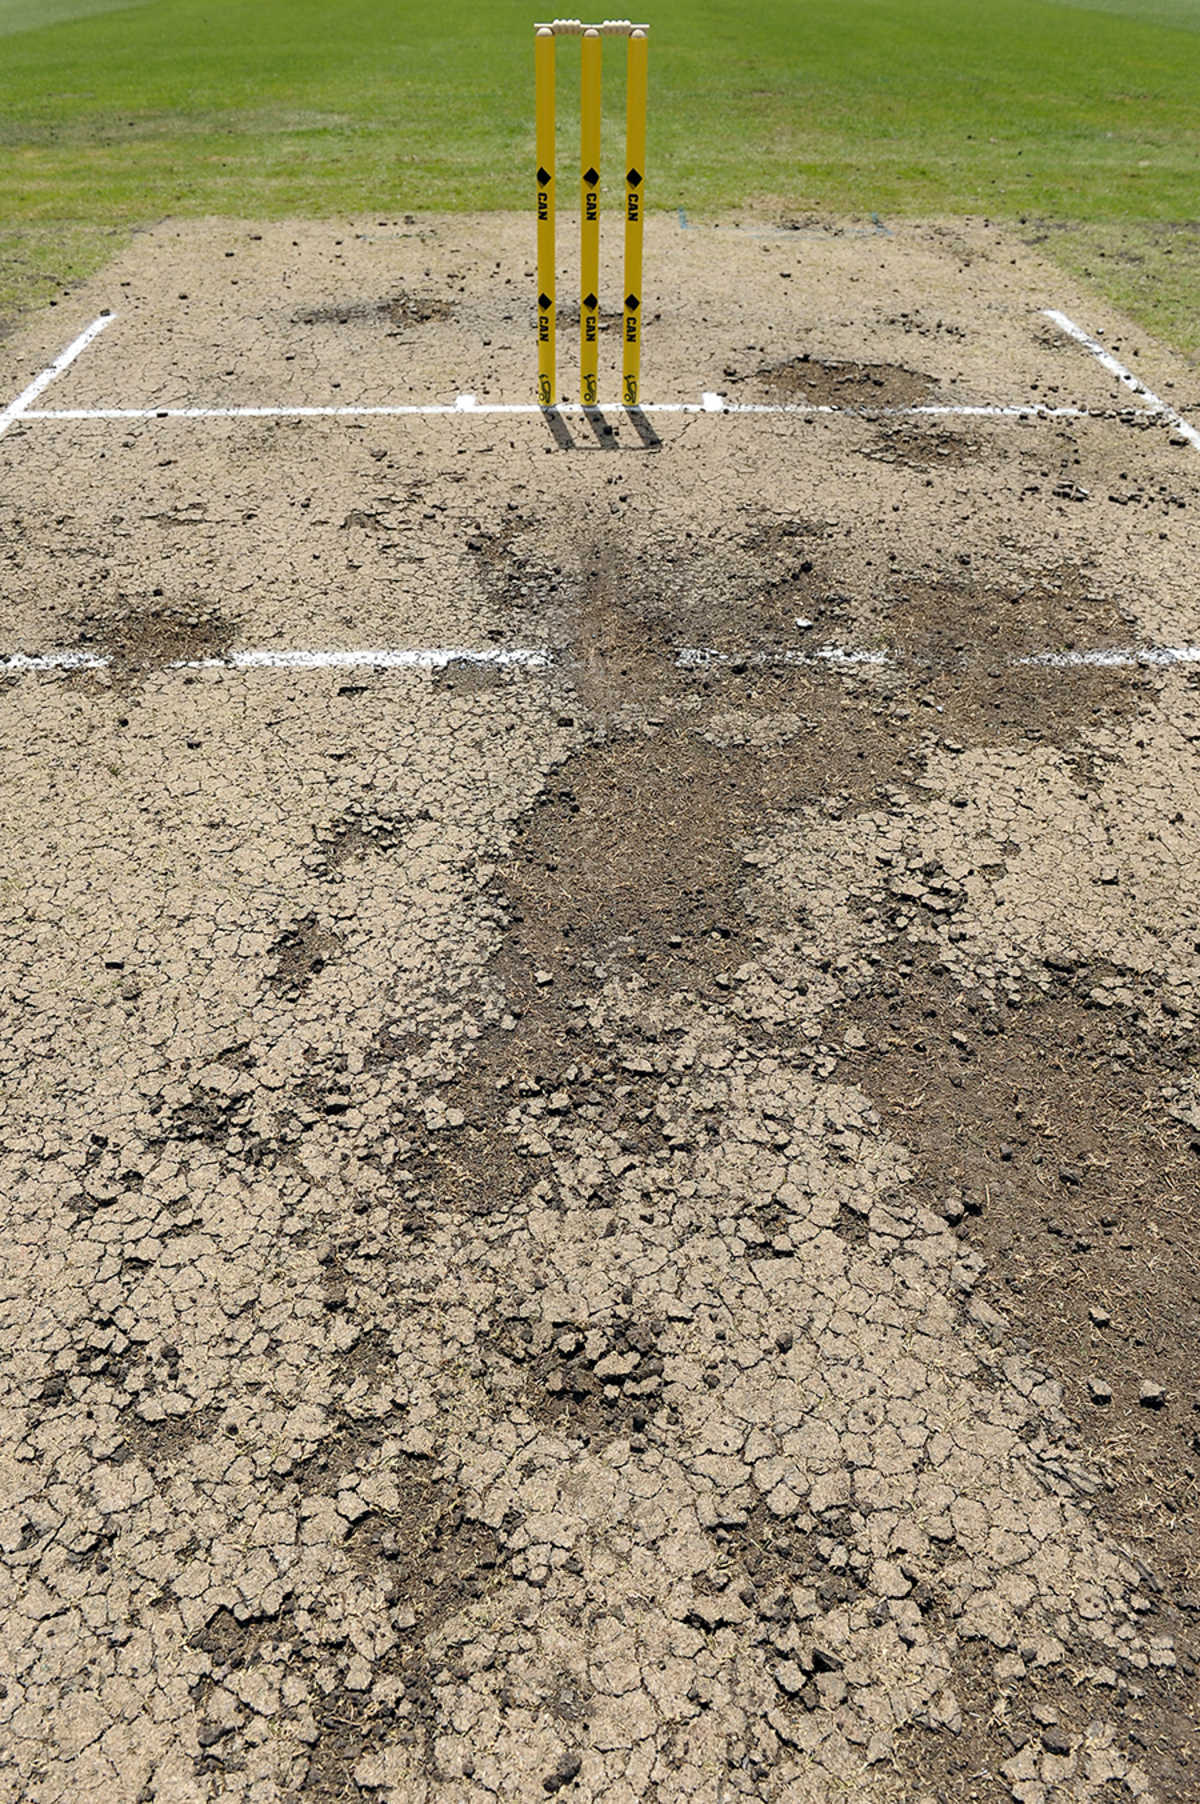 The pitch for the New Zealanders' tour game shows signs of deterioration